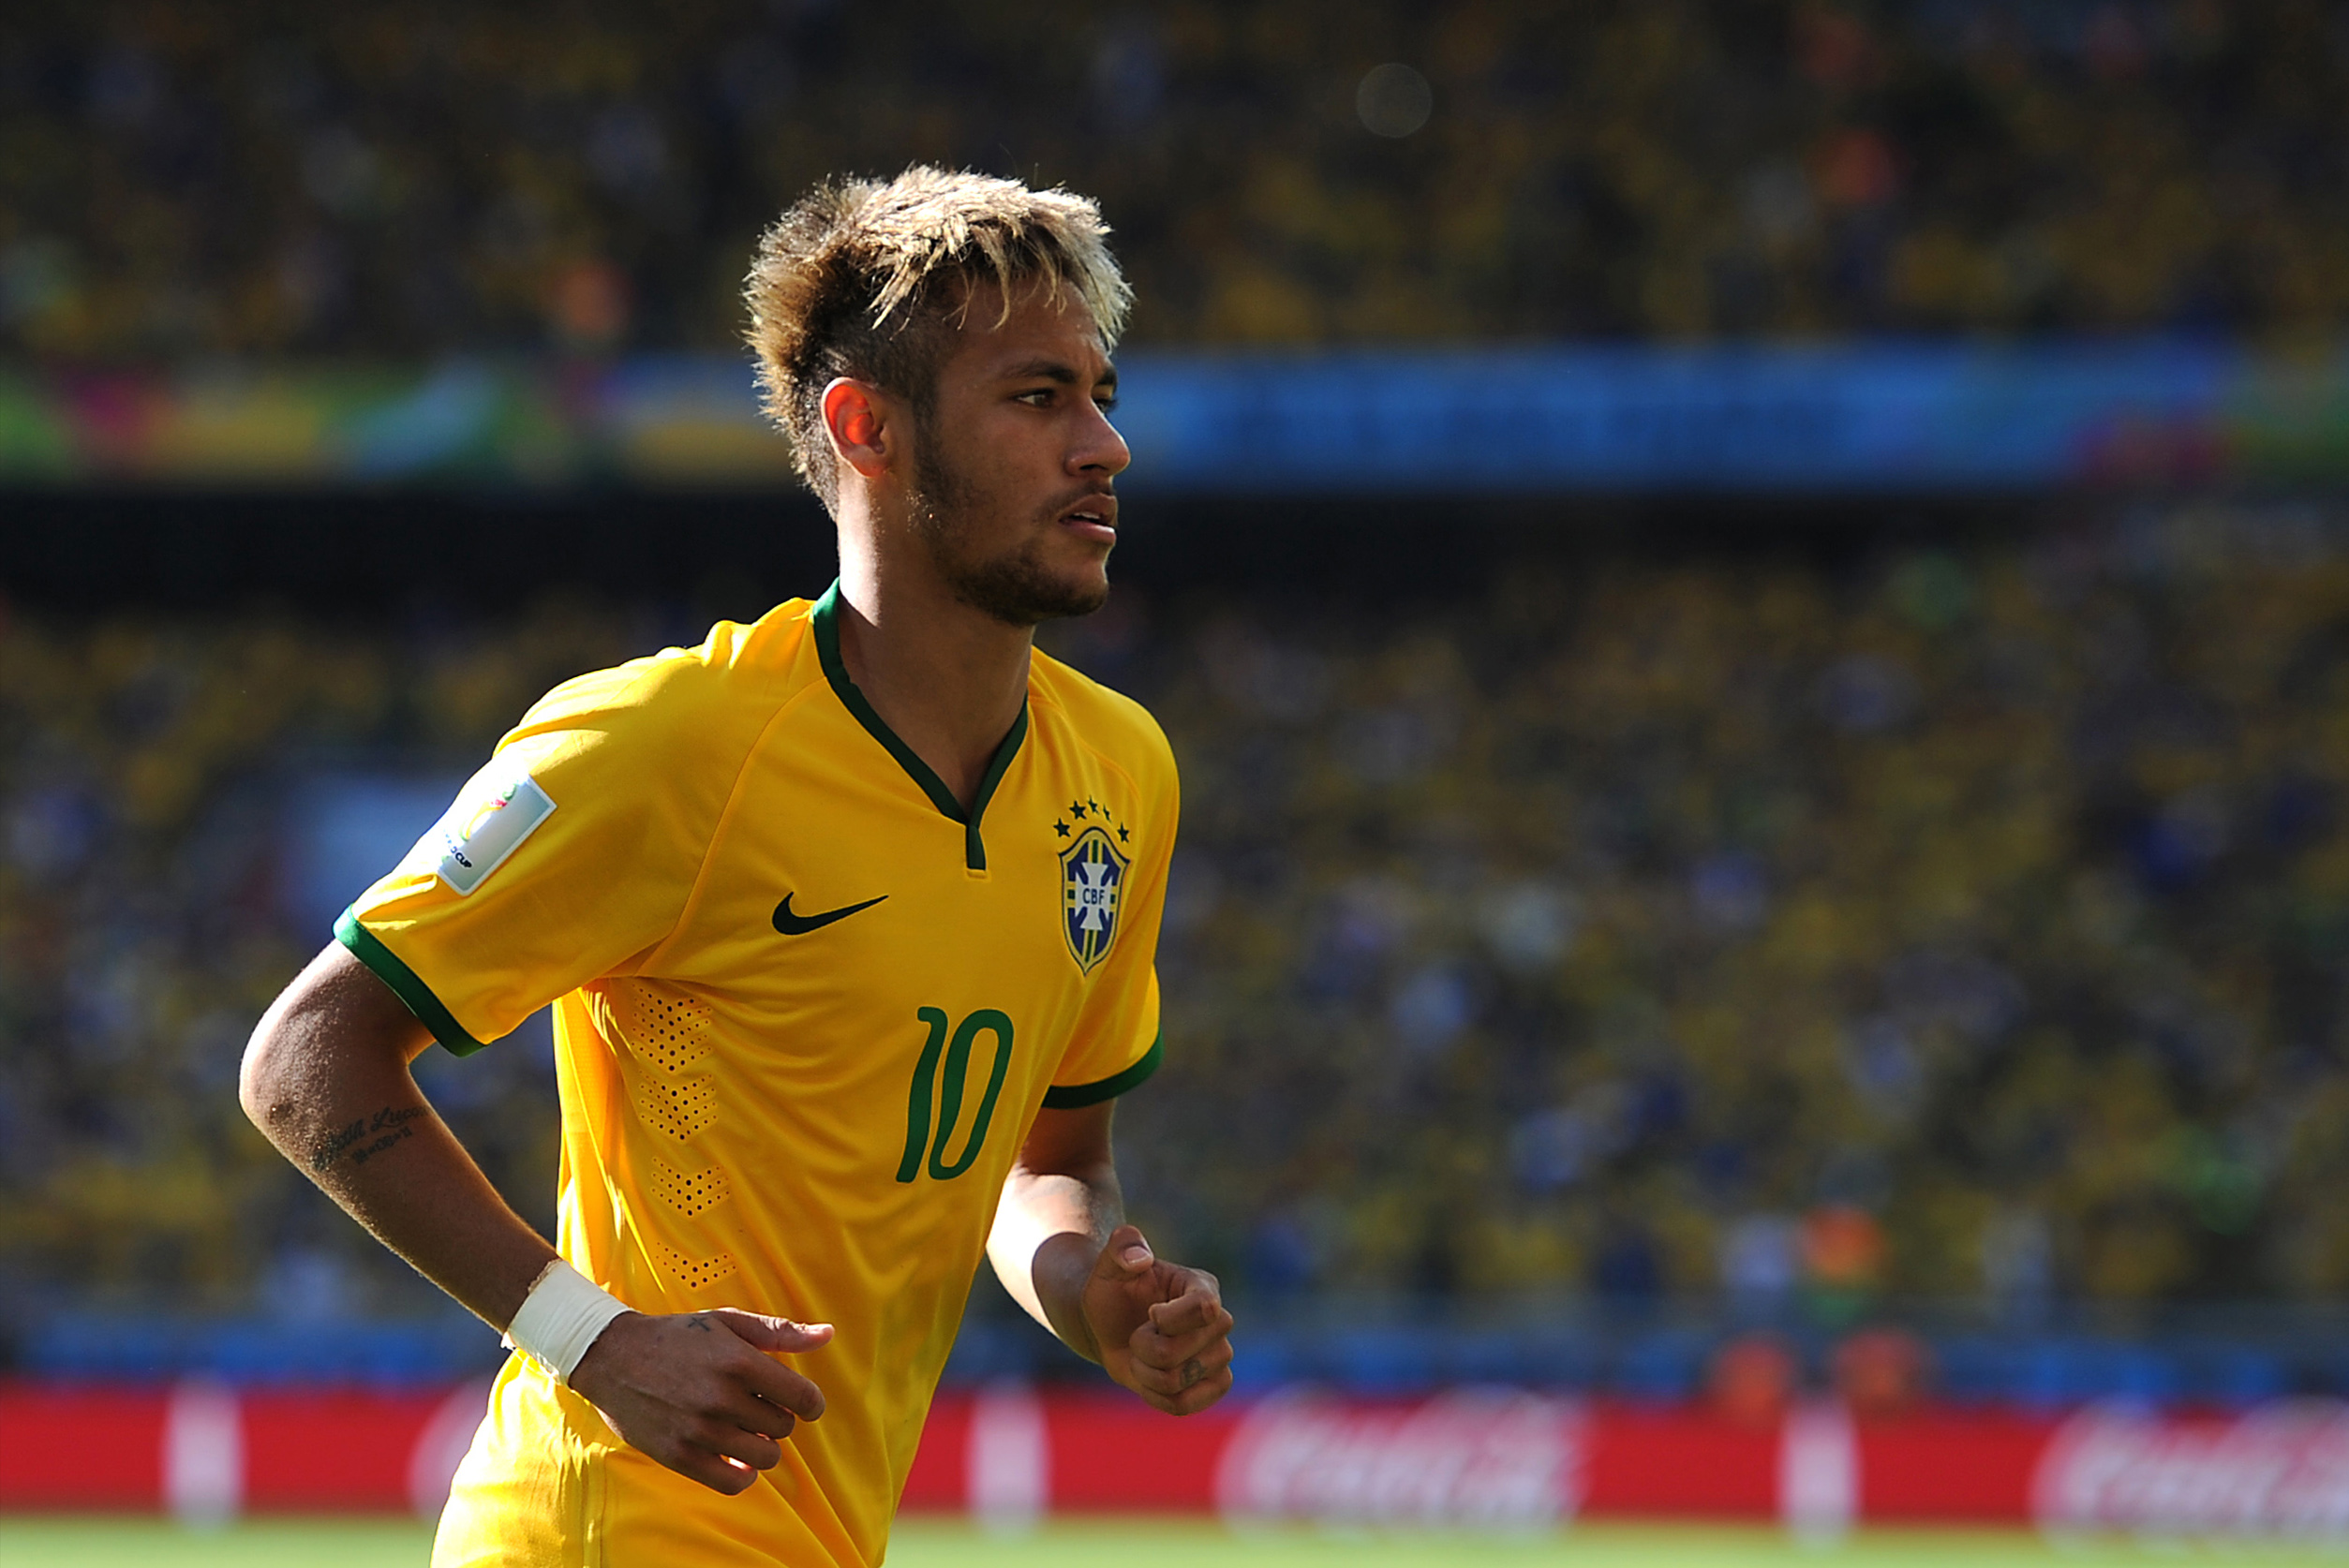 PHOTO: Neymar of Brazil looks on during the 2014 FIFA World Cup Brazil match between Brazil and Chile at Estadio Mineirao on June 28, 2014 in Belo Horizonte, Brazil.